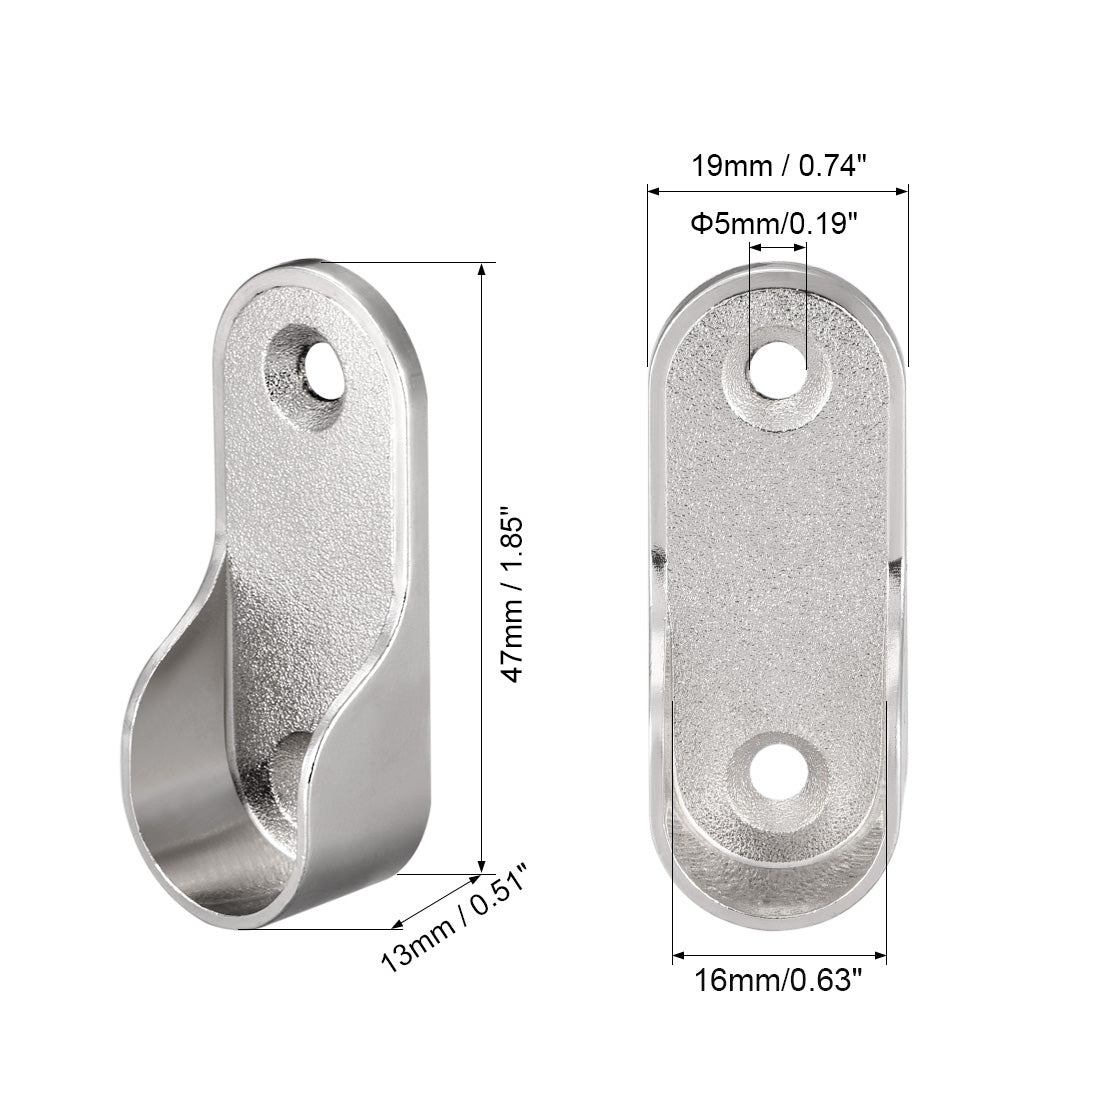 uxcell Uxcell Oval Closet Rod End Supports, Fit Rod Dia 16mm 4 PCS - Wardrobe Rod Flange Bracket Support - Nickel Plating